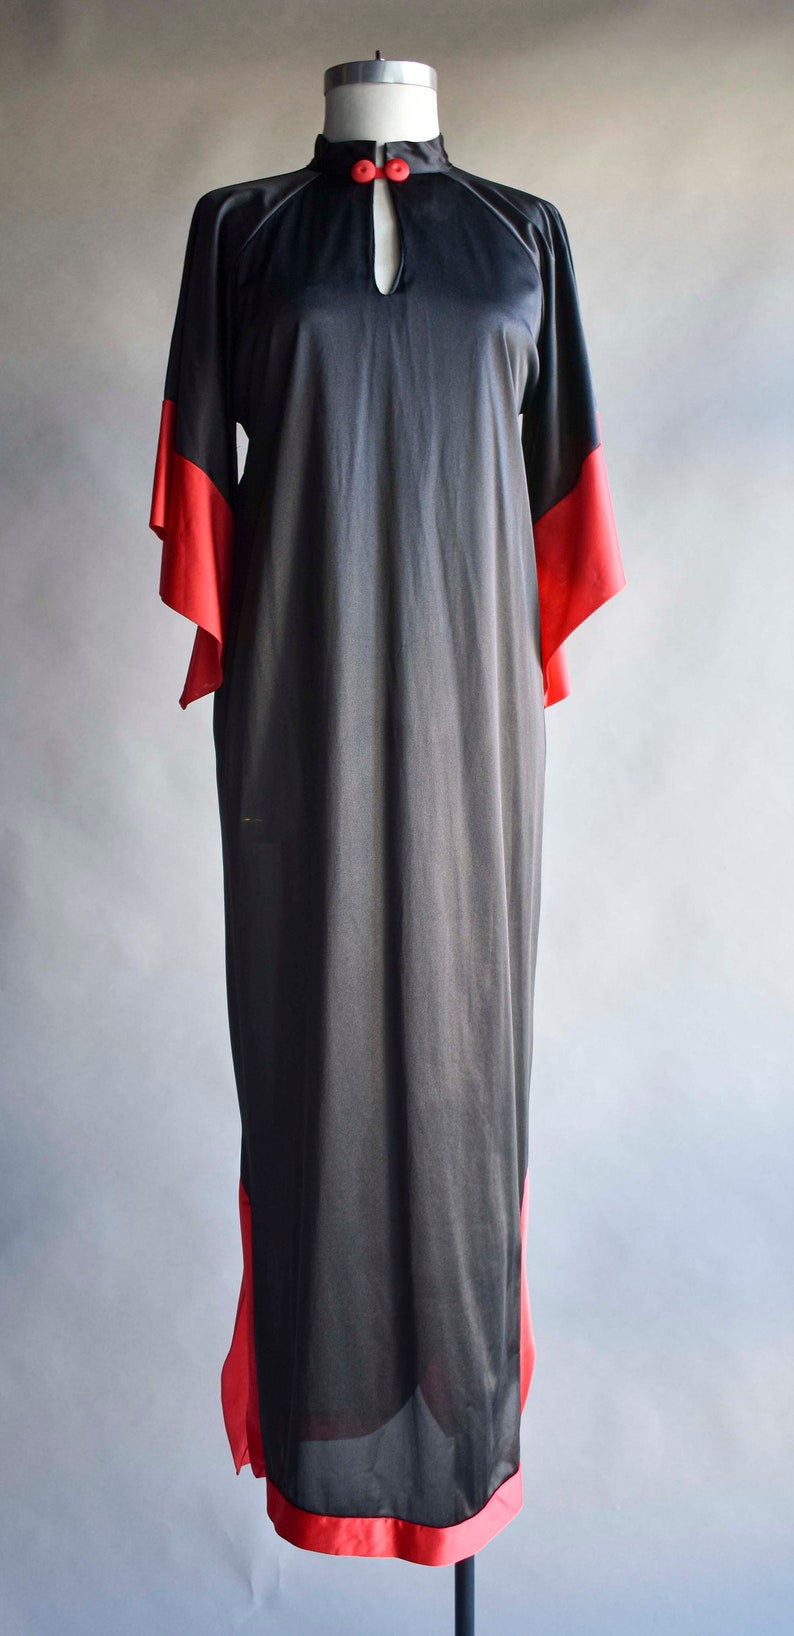 Vintage 70s Black and Red Nightgown / 70s Long Nightgown / Gothic Vintage Nightgown / Red and Black / Black and Red Nightgown / 70s robe image 2